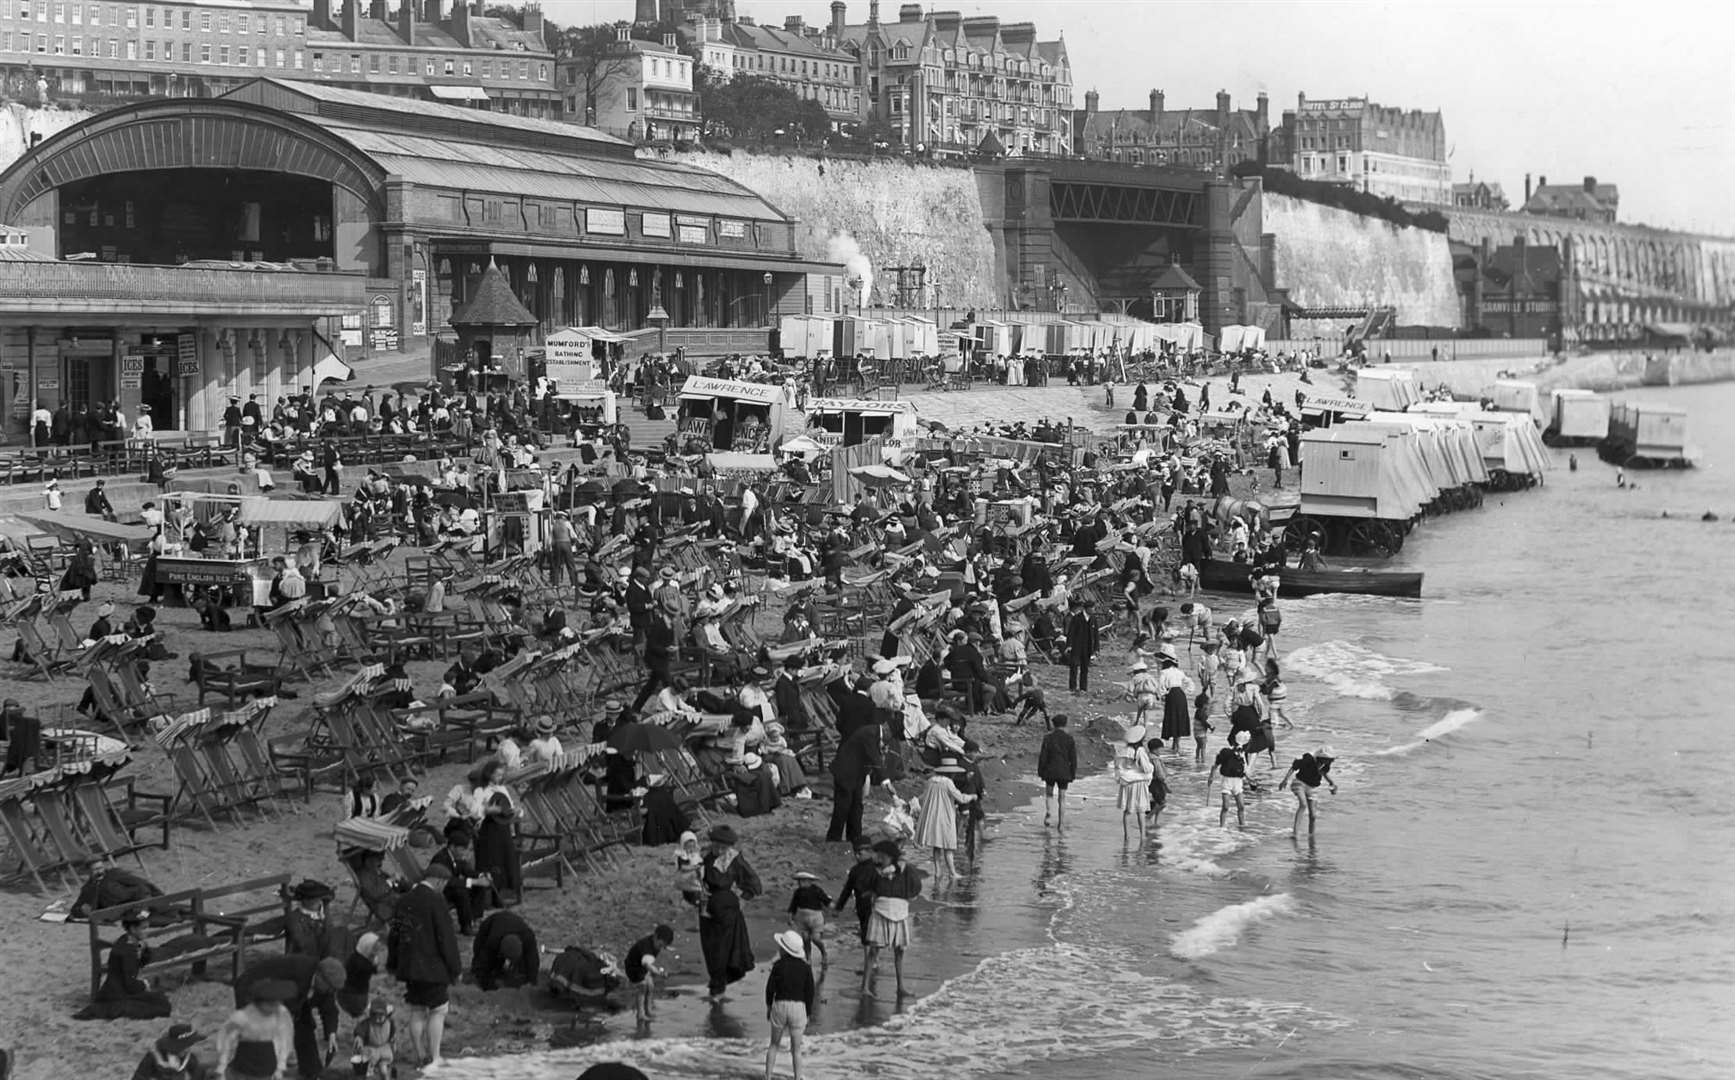 The old Ramsgate Harbour station looms in the background as people pack the beach with deck chairs